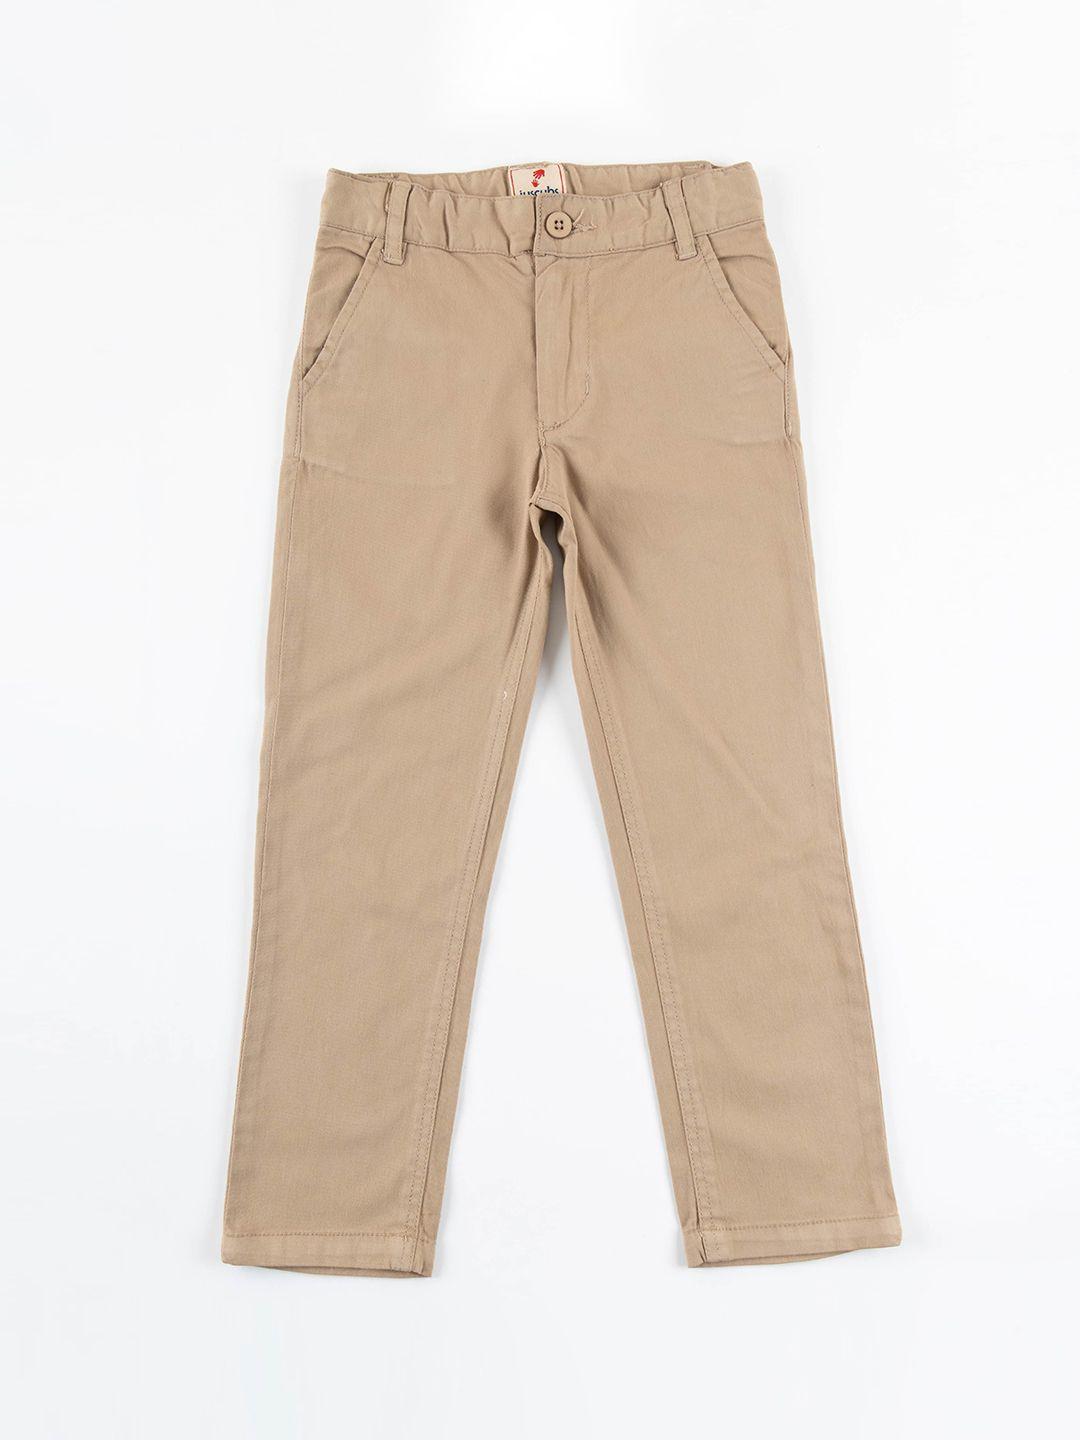 JusCubs Boys Beige Smart Cotton Chinos Trousers